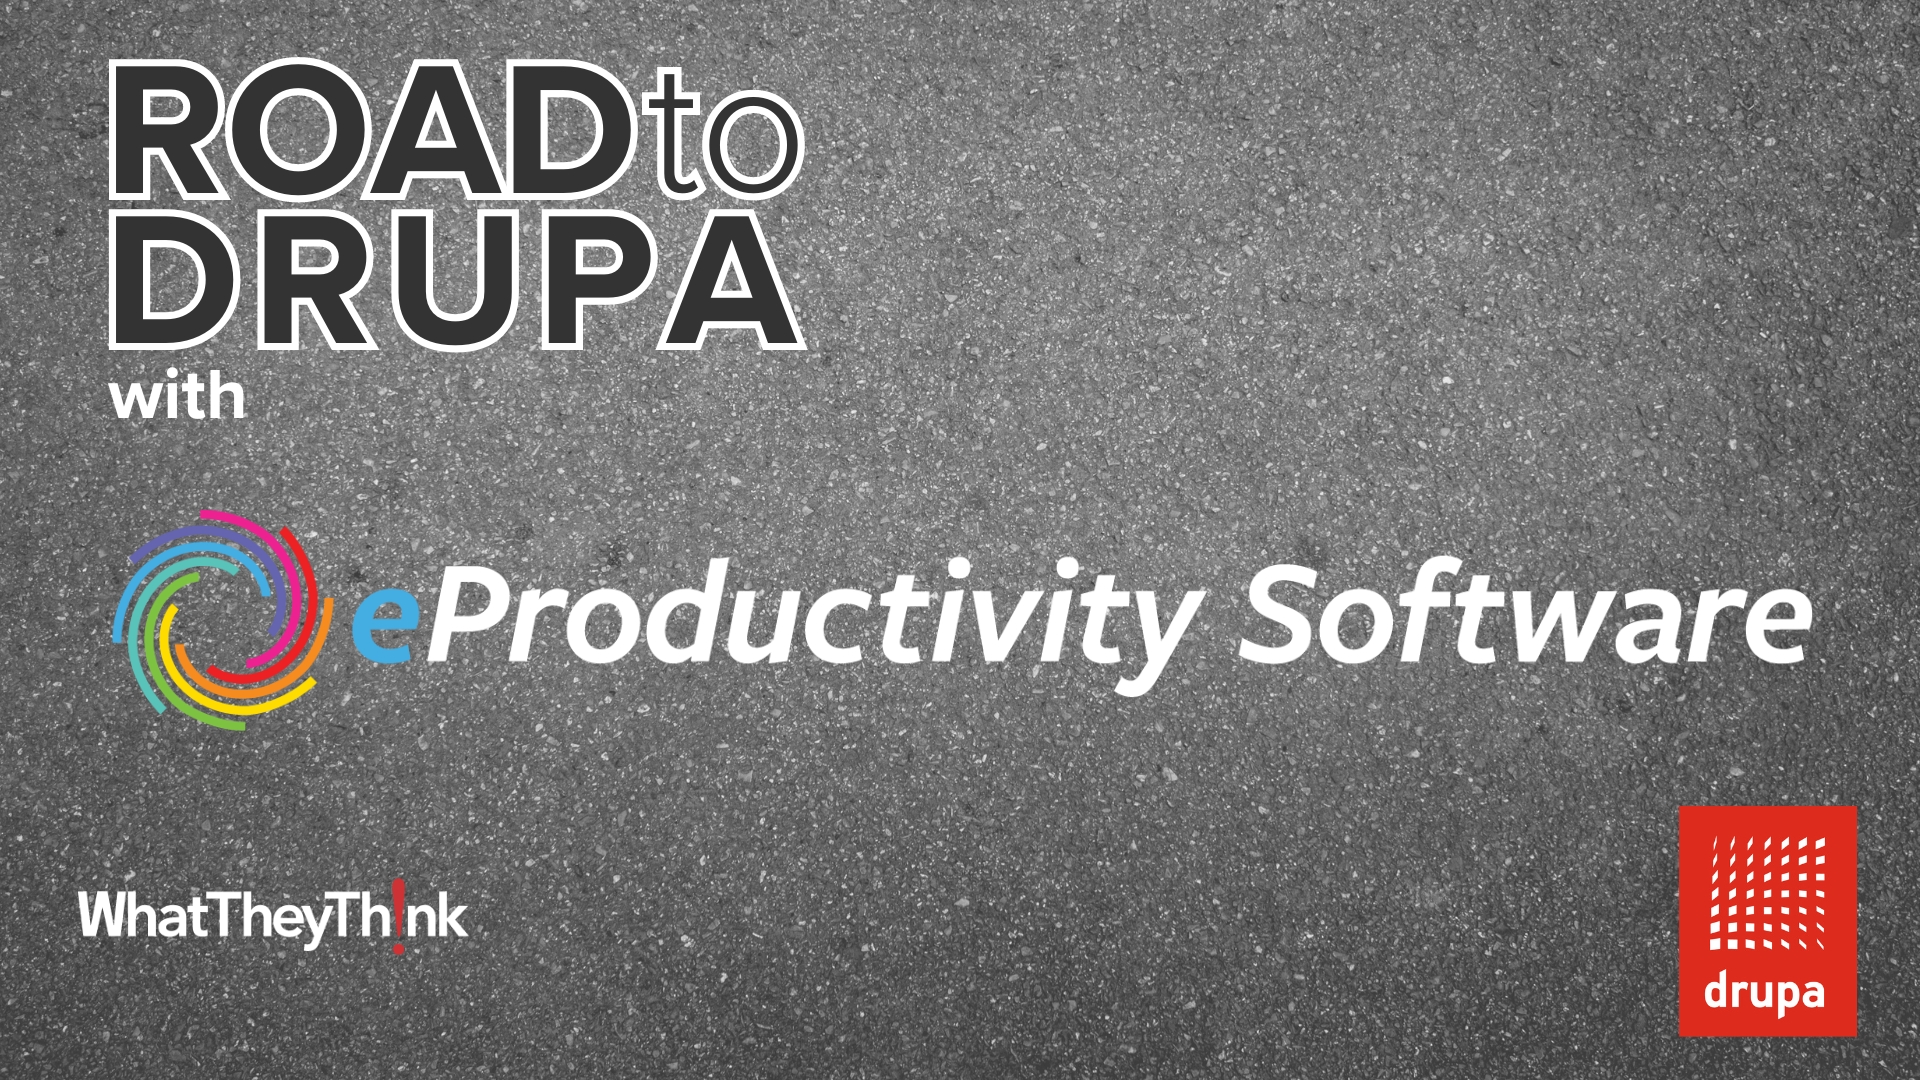 Video preview: Road to drupa: eProductivity Software